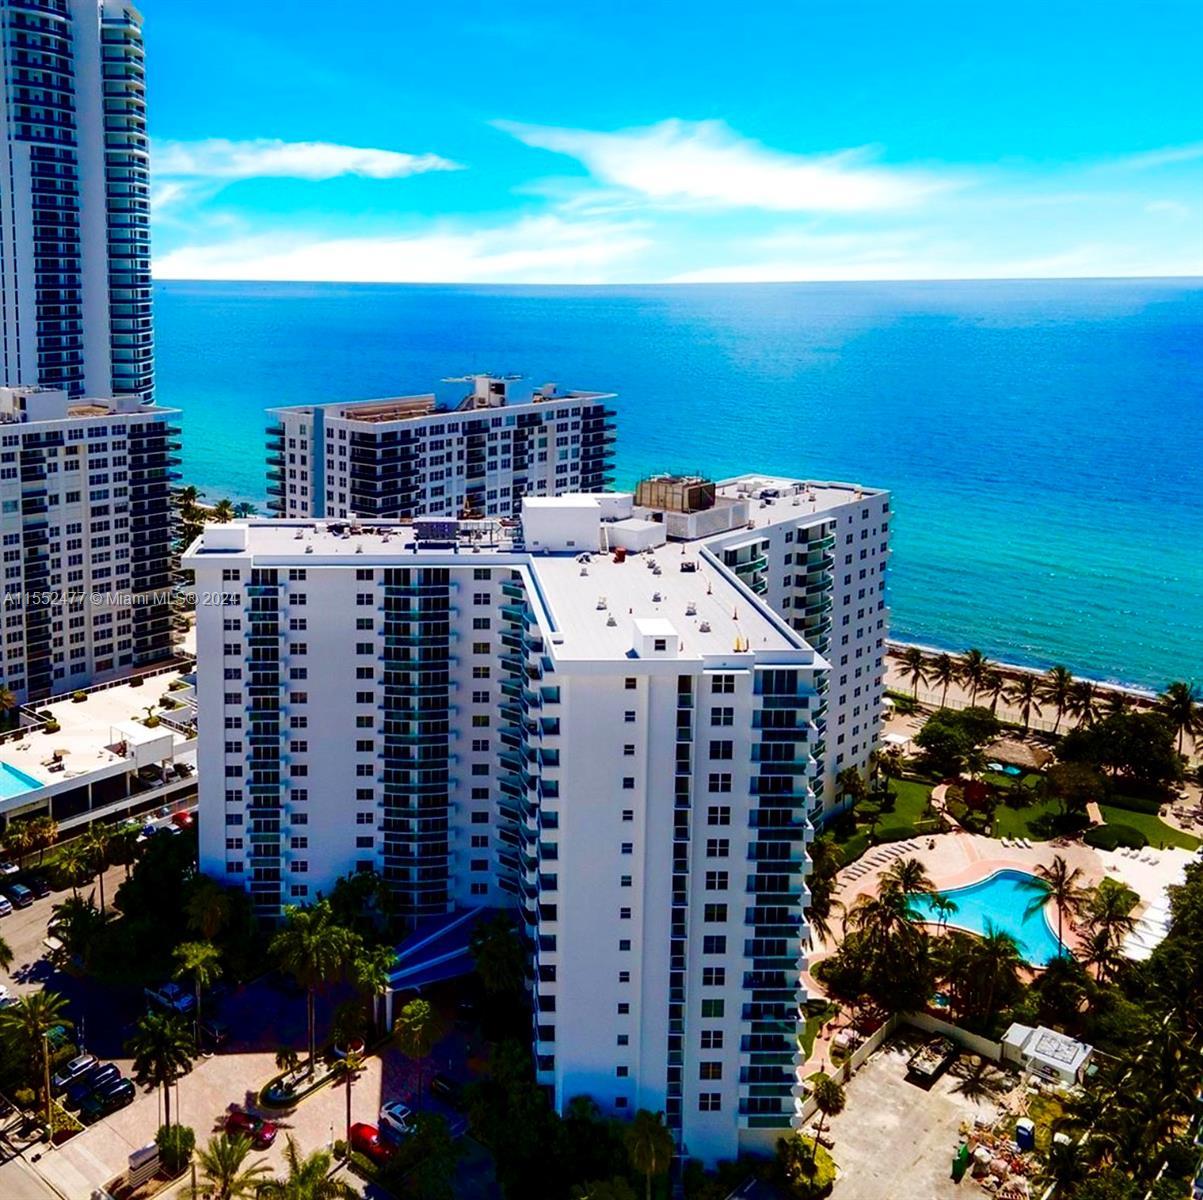 Photo of 3001 S Ocean Dr #1041 in Hollywood, FL